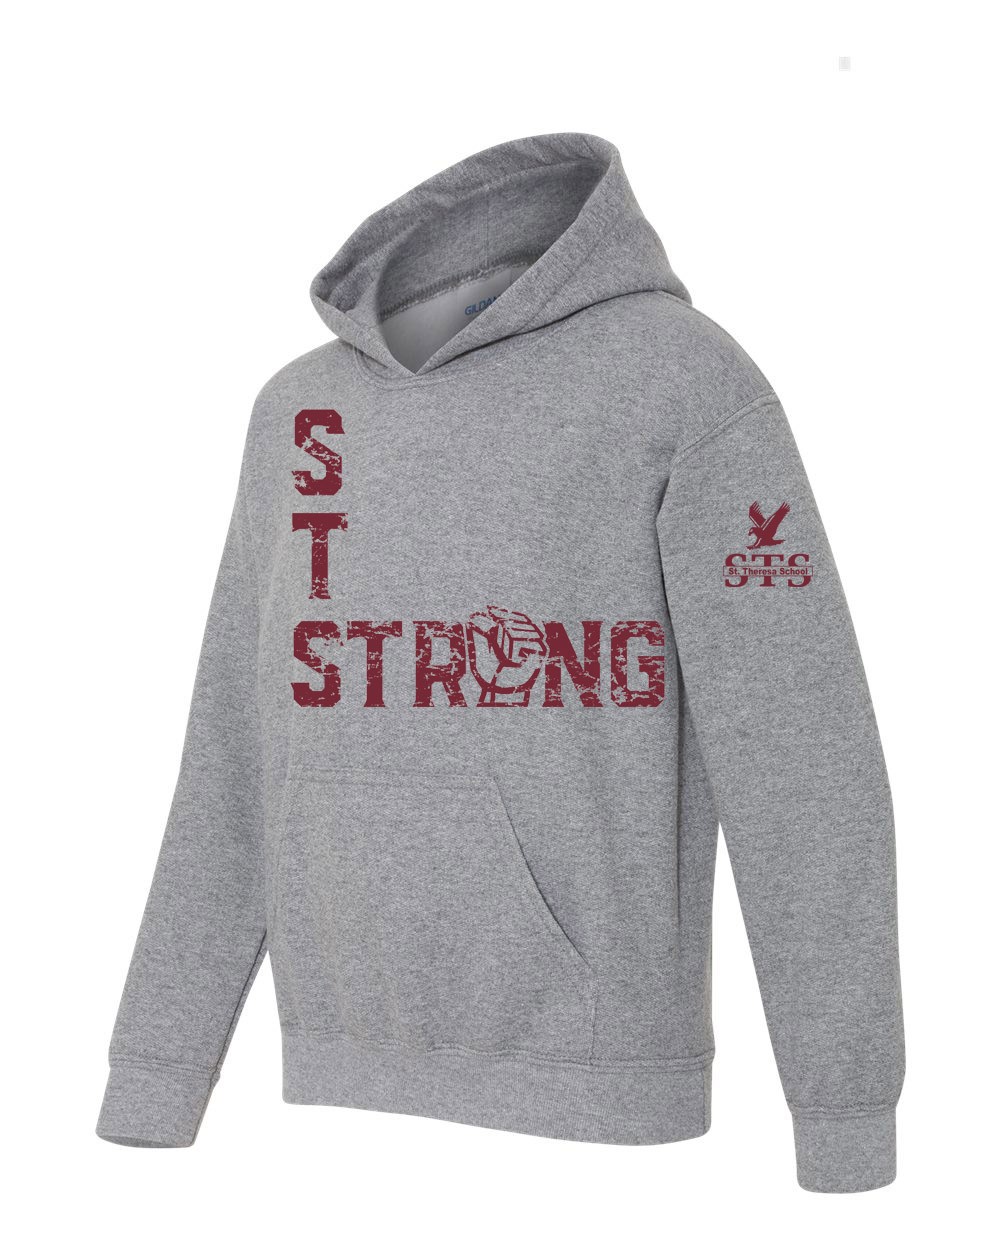 STS Strong Fist Spirit Pullover Hoodie w/ Maroon Logo - Please allow 2-3 Weeks for Delivery